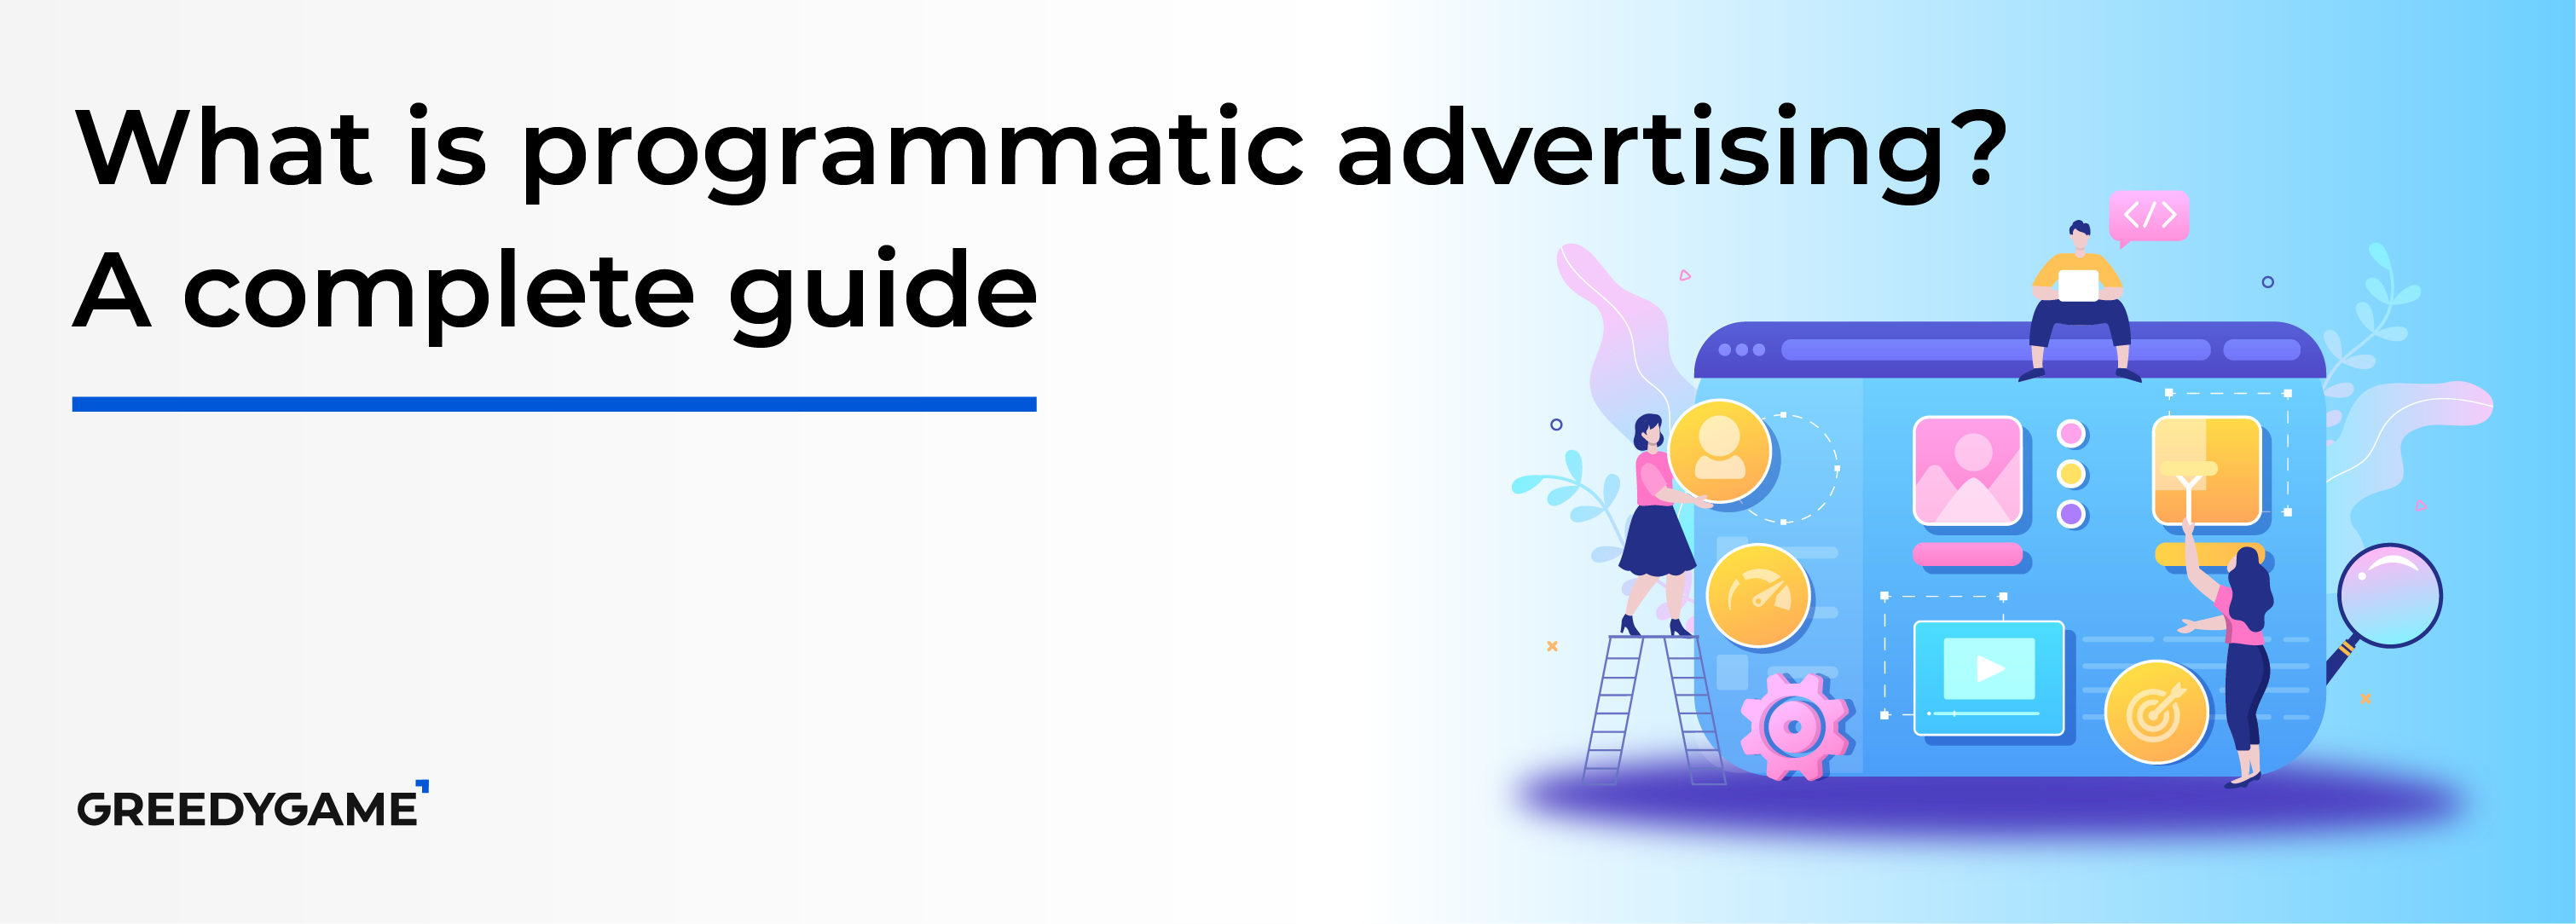 What is programmatic advertising - A complete guide